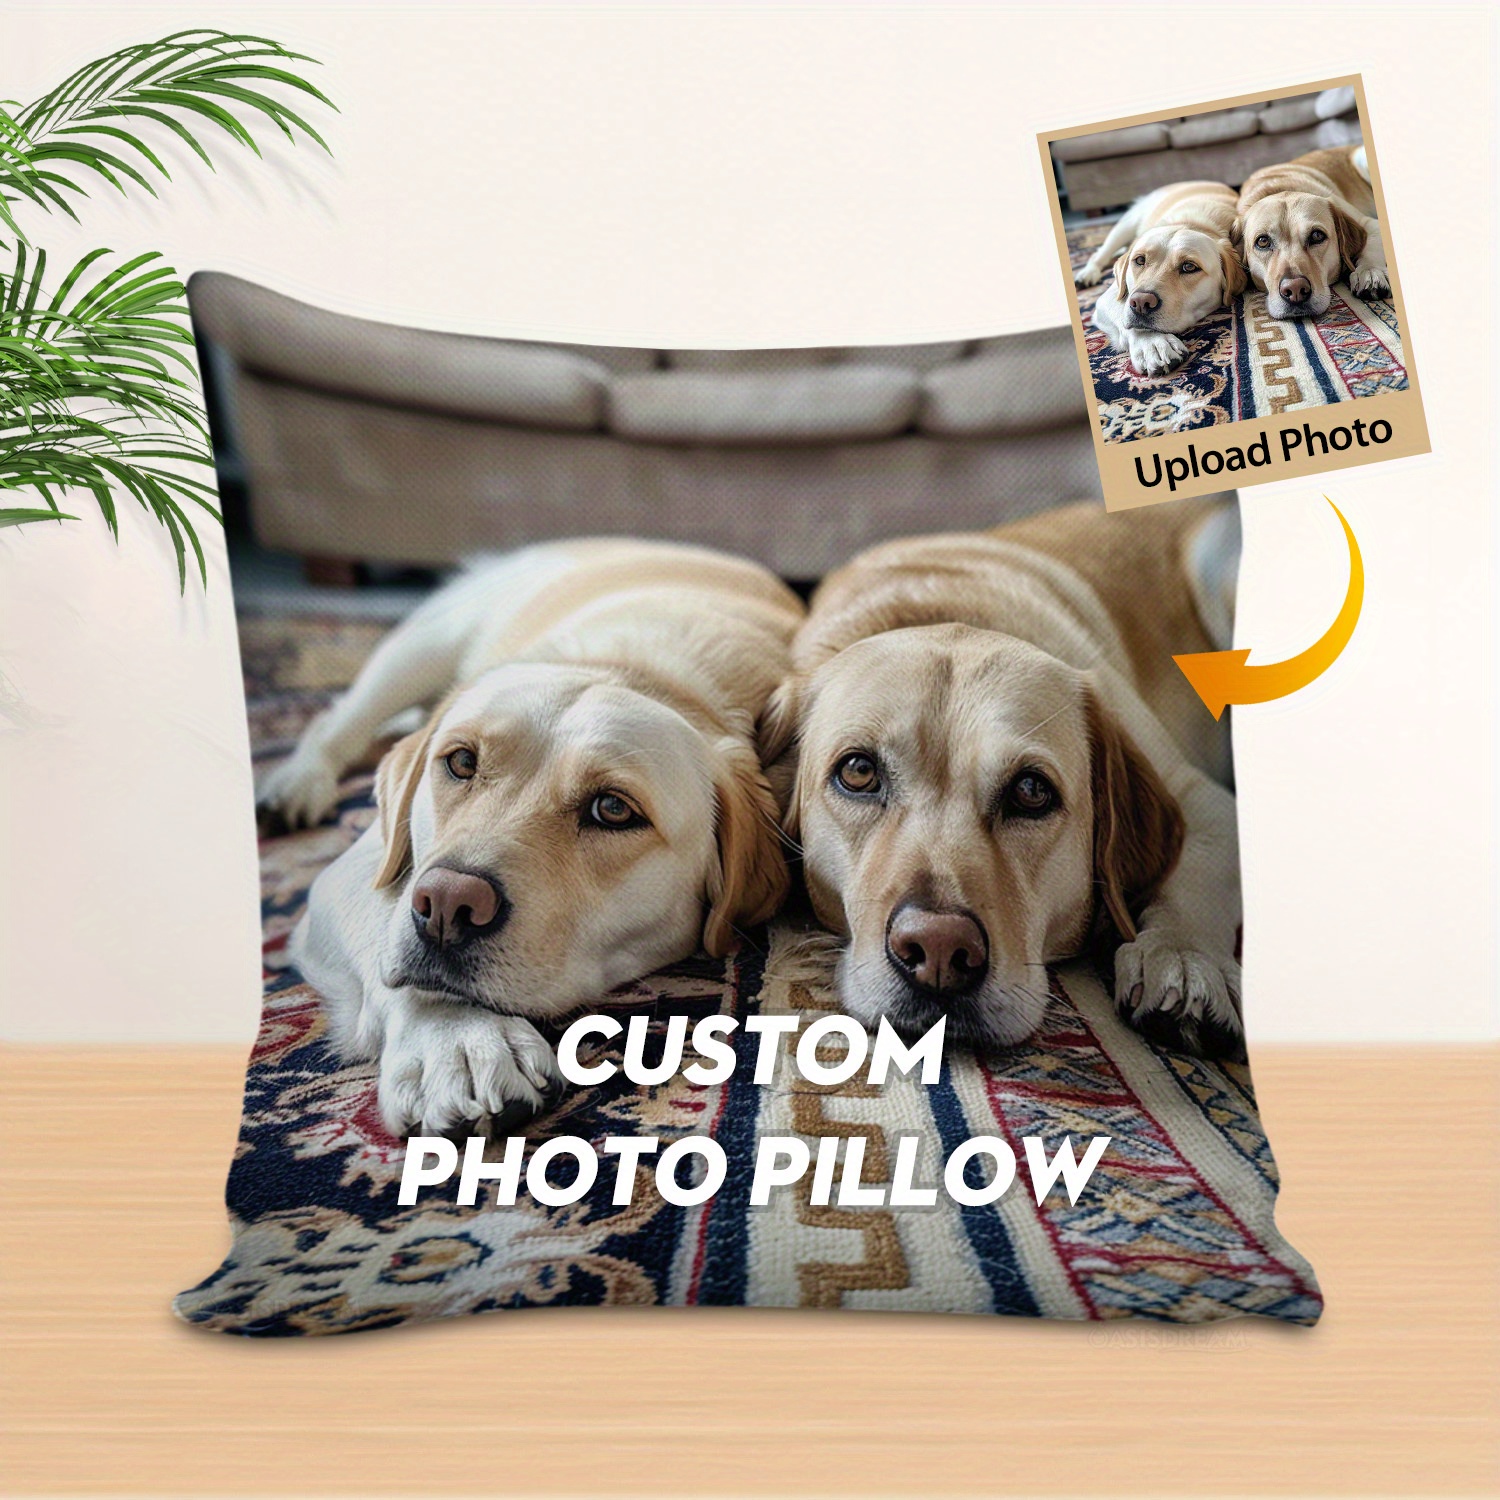 

(custom Photo) 1pc Personalized Single Sided Printing Throw Pillow, Sofa Square Cushion With Custom Dog Photo, Birthday Gifts For Dog Pet Lovers Bedroom Decor, Living Room Decor, Car Decor